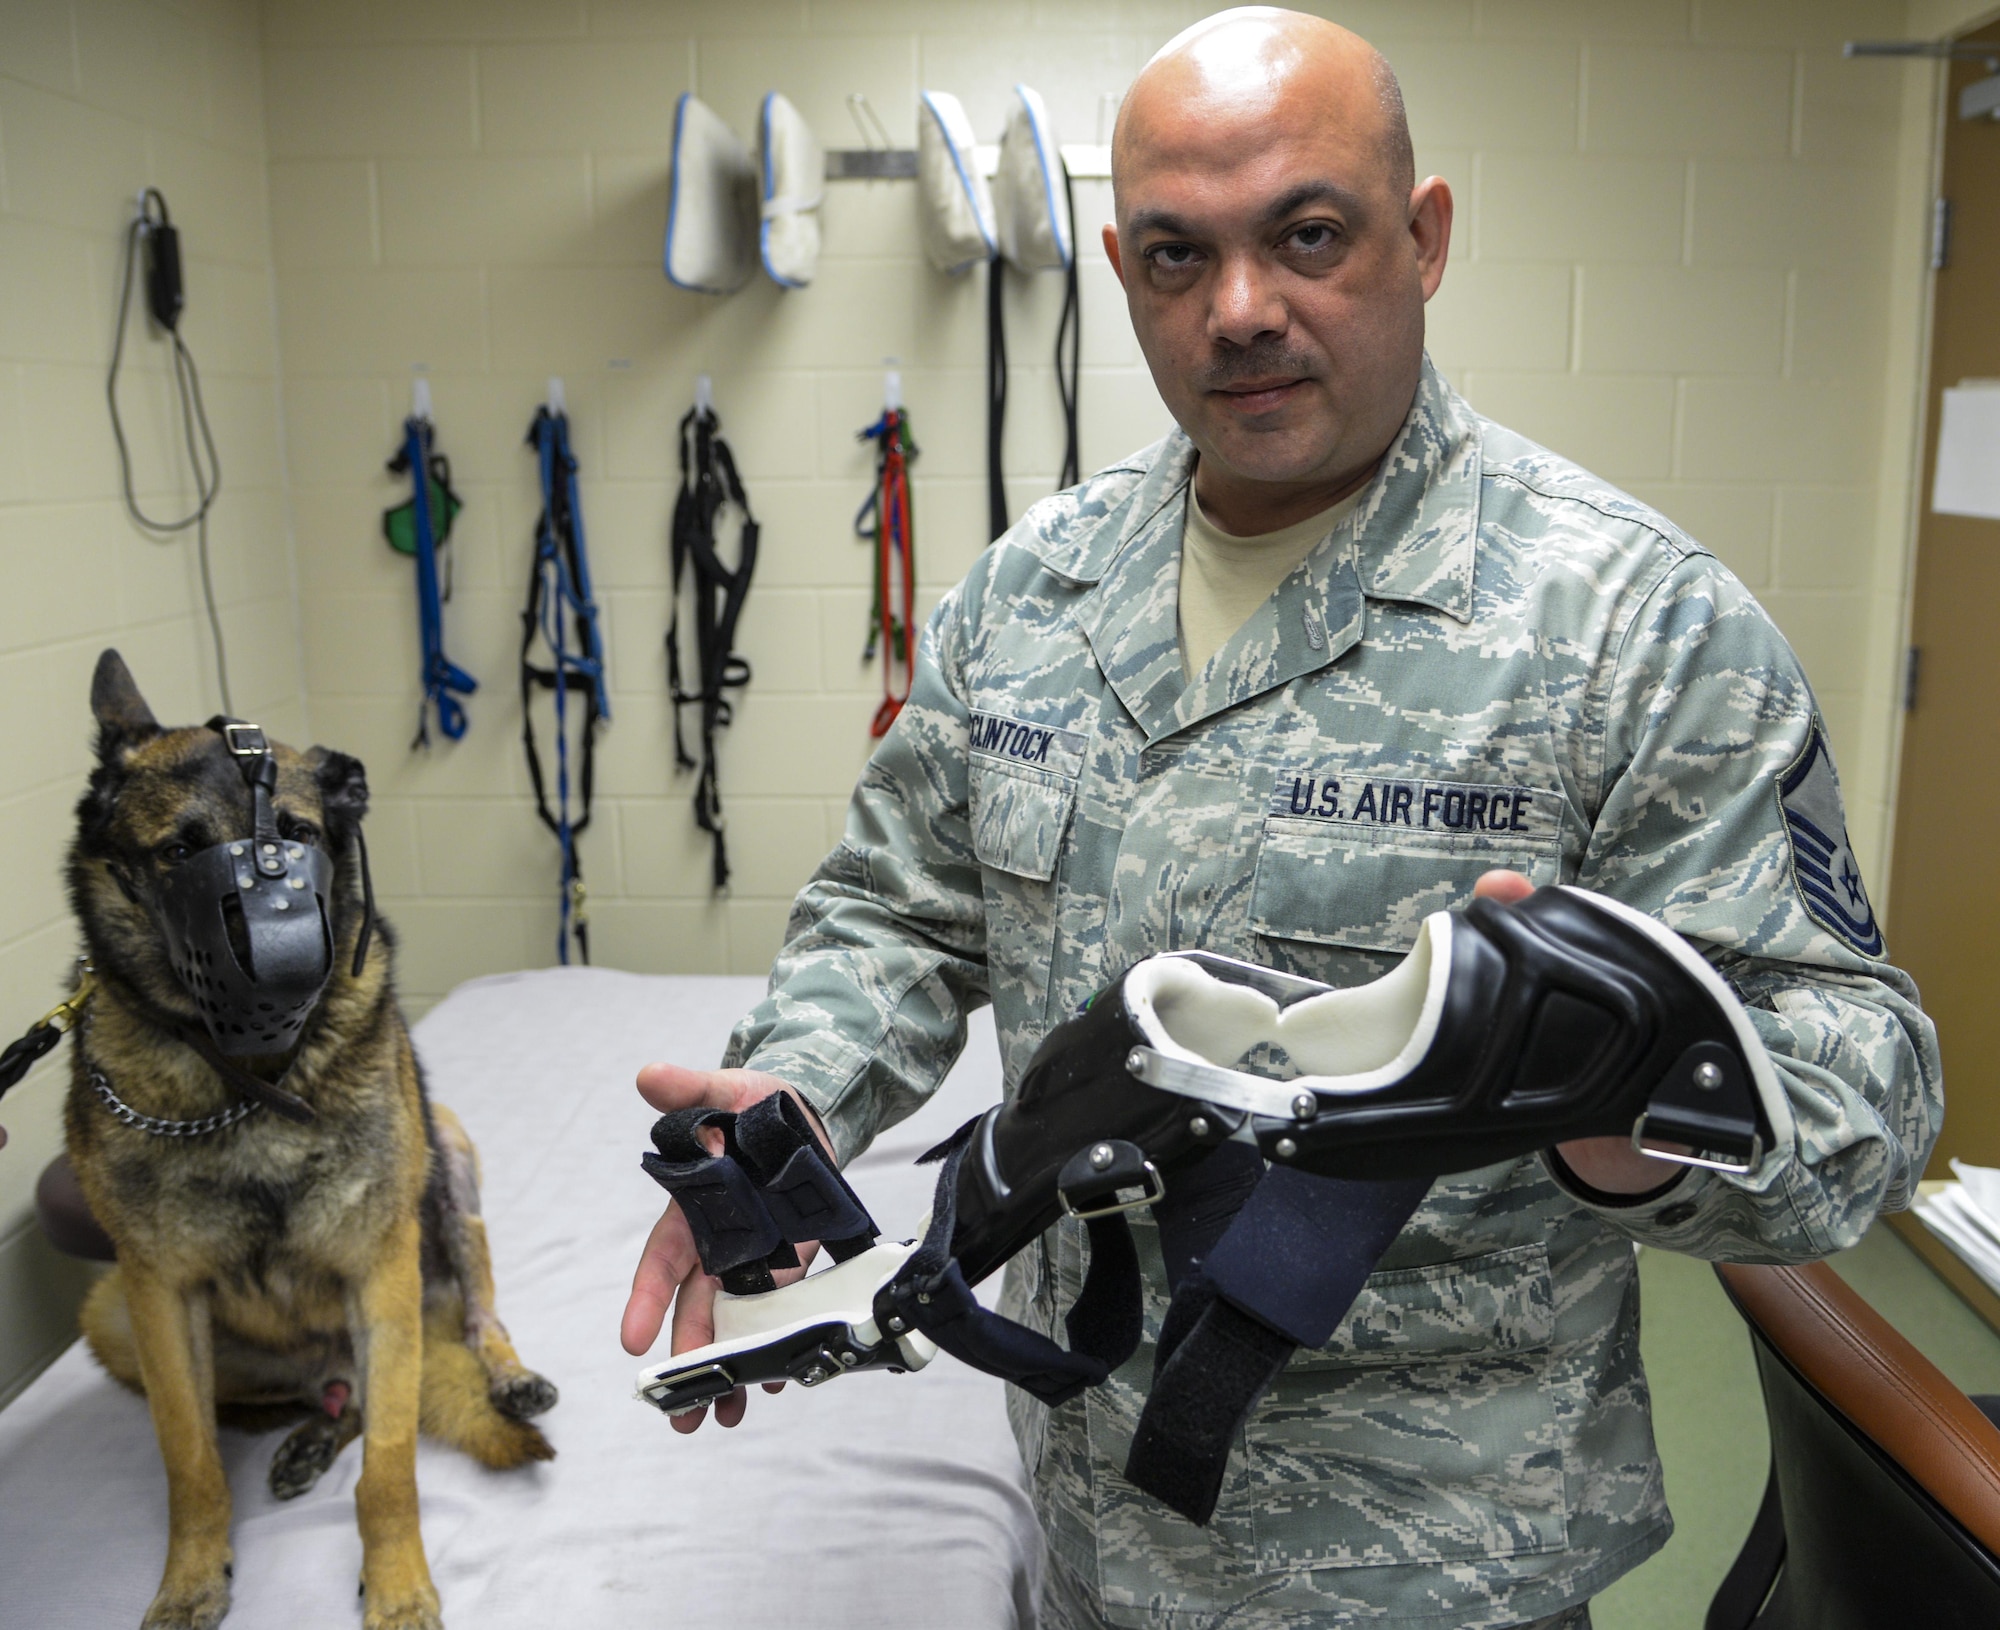 Master Sgt. Sean McClintock, NCO in charge of the 59th Medical Wing Orthotic Lab, displays the brace he modified for Military Working Dog SStash at the Holland Military Working Dog Hospital on Joint Base San Antonio-Lackland, Texas, April 2, 2015. (U.S. Air Force photo by Staff Sgt. Michael Ellis)